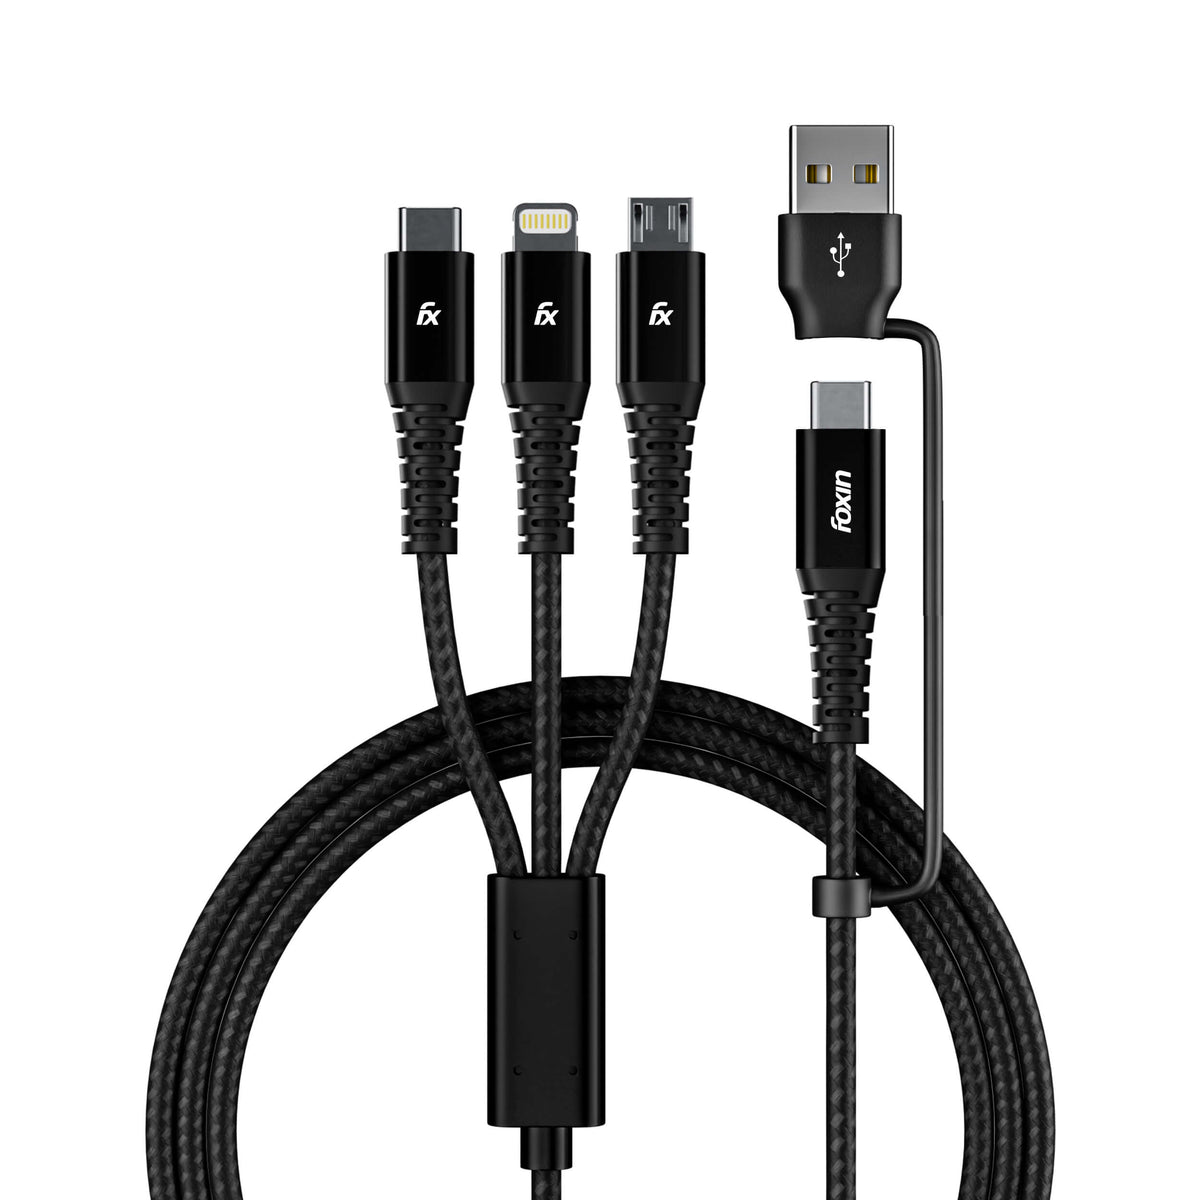 Foxin MAC 05 Dual Input 3 in 1 Nylon Braided 1.5mt 4 Amp Multipurpose Parallel Fast Charging Cable | Universally compatible | USB &amp; Typc C Input | Type C, 8 Pin, Micro Output | Made in India | Black